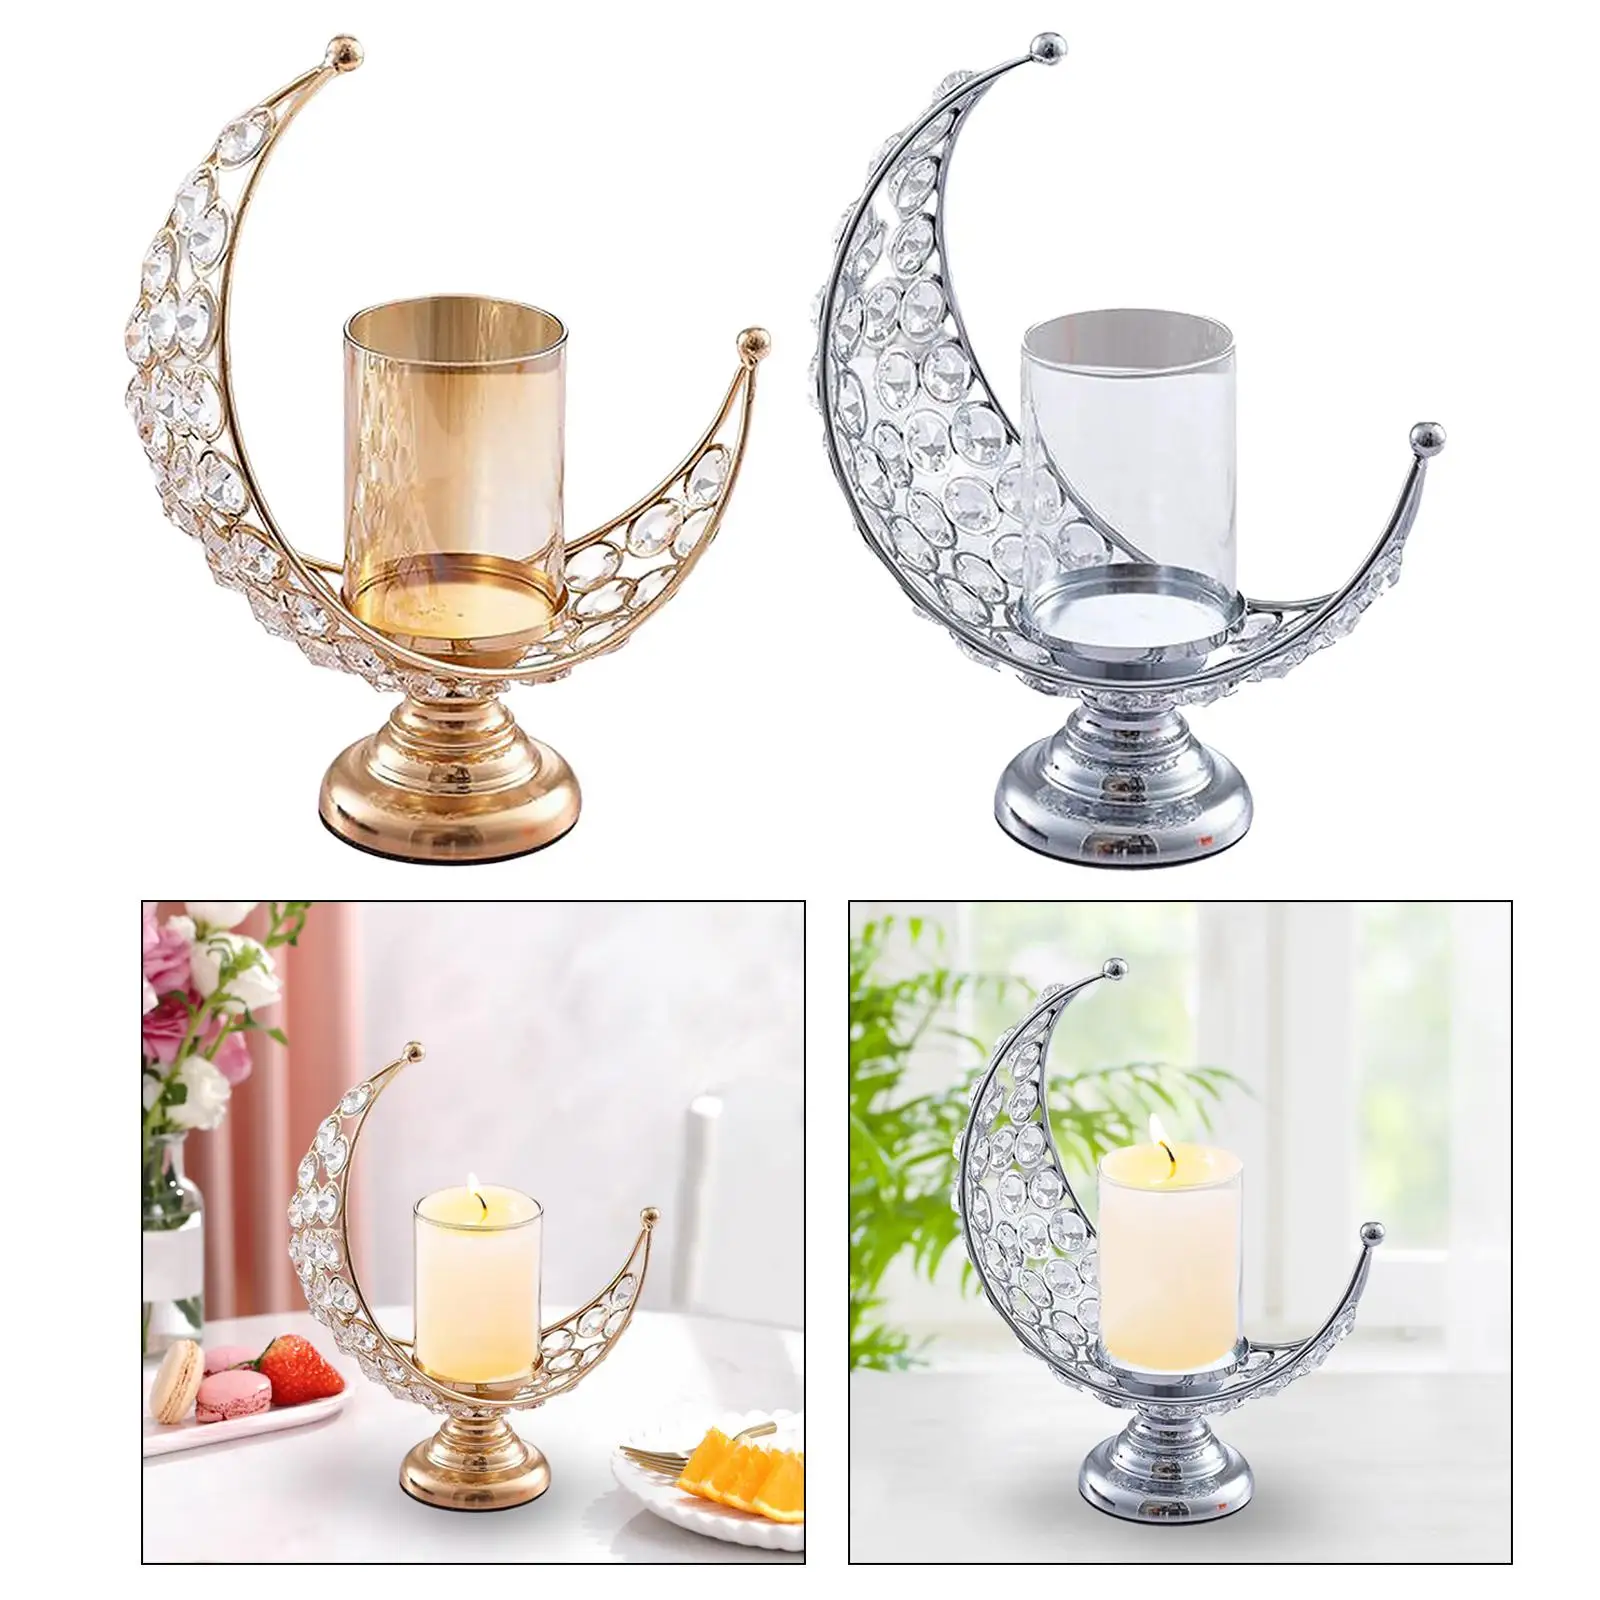 Moon Shape Candlestick Holder Home Decor Table Centerpieces Candle Holder